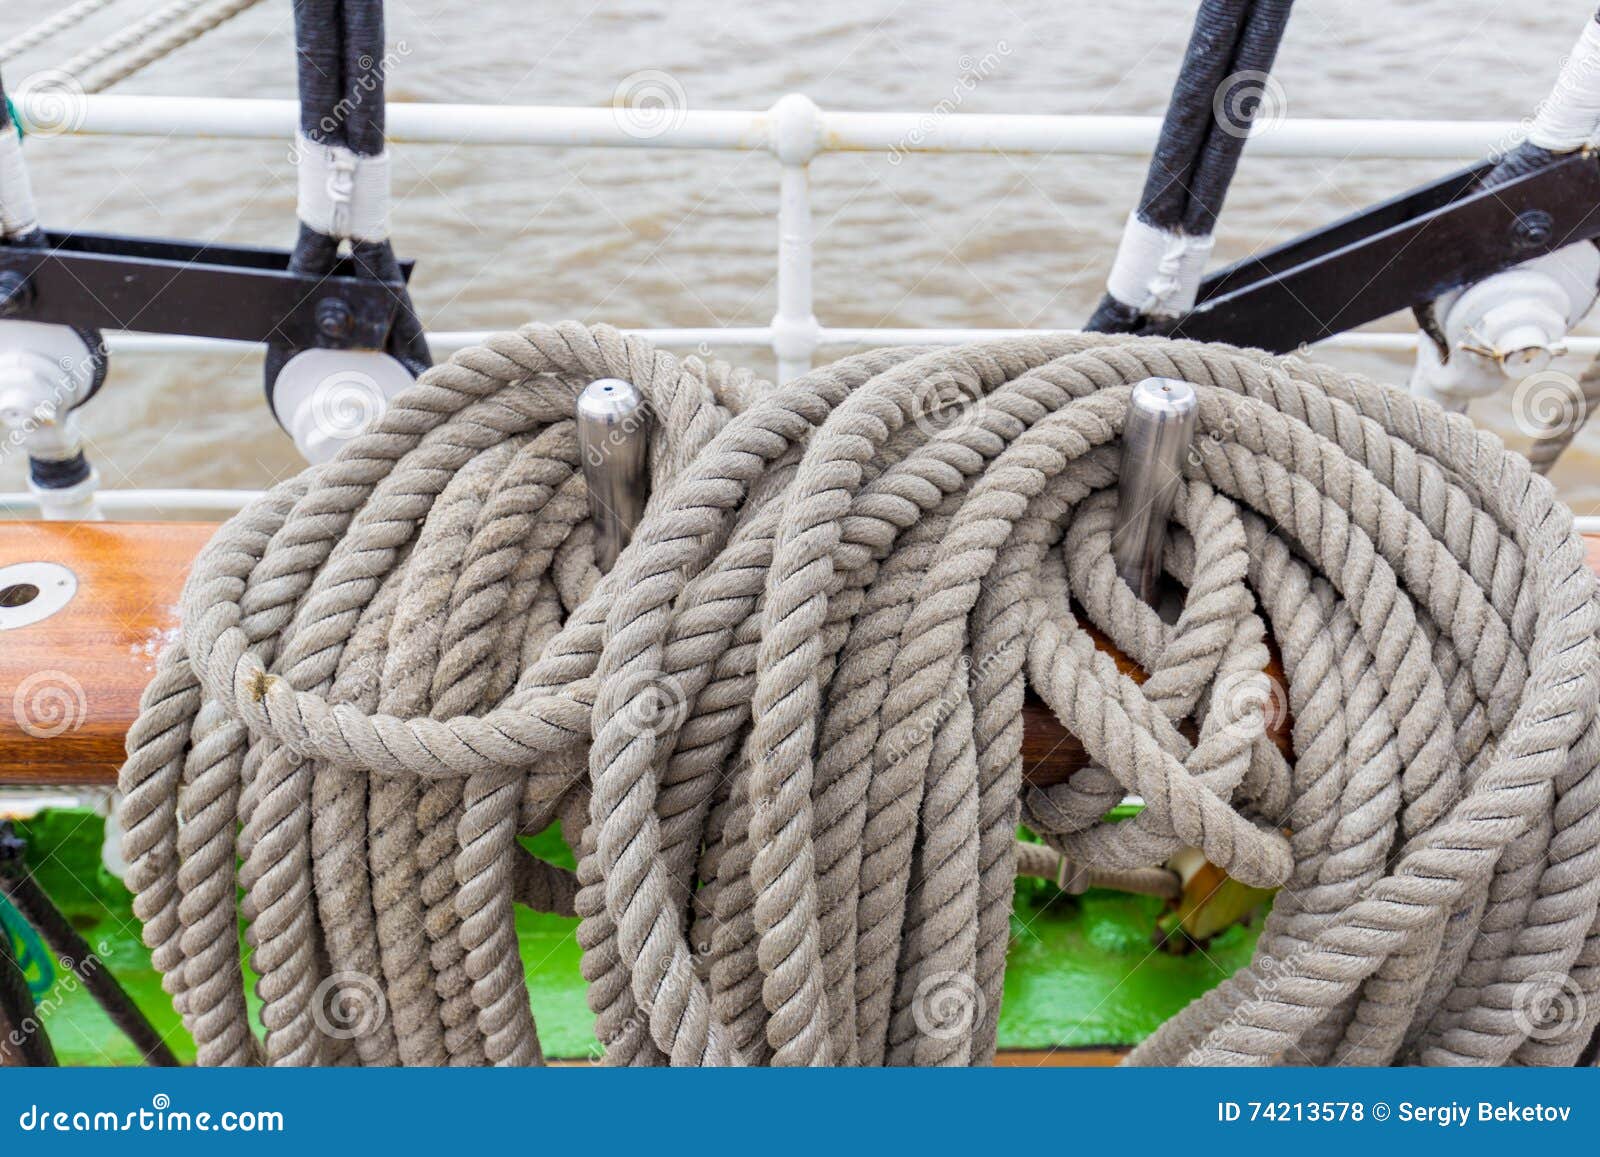 Thick Ship Vessel Rigging Rope in Various Shapes and Colors on a